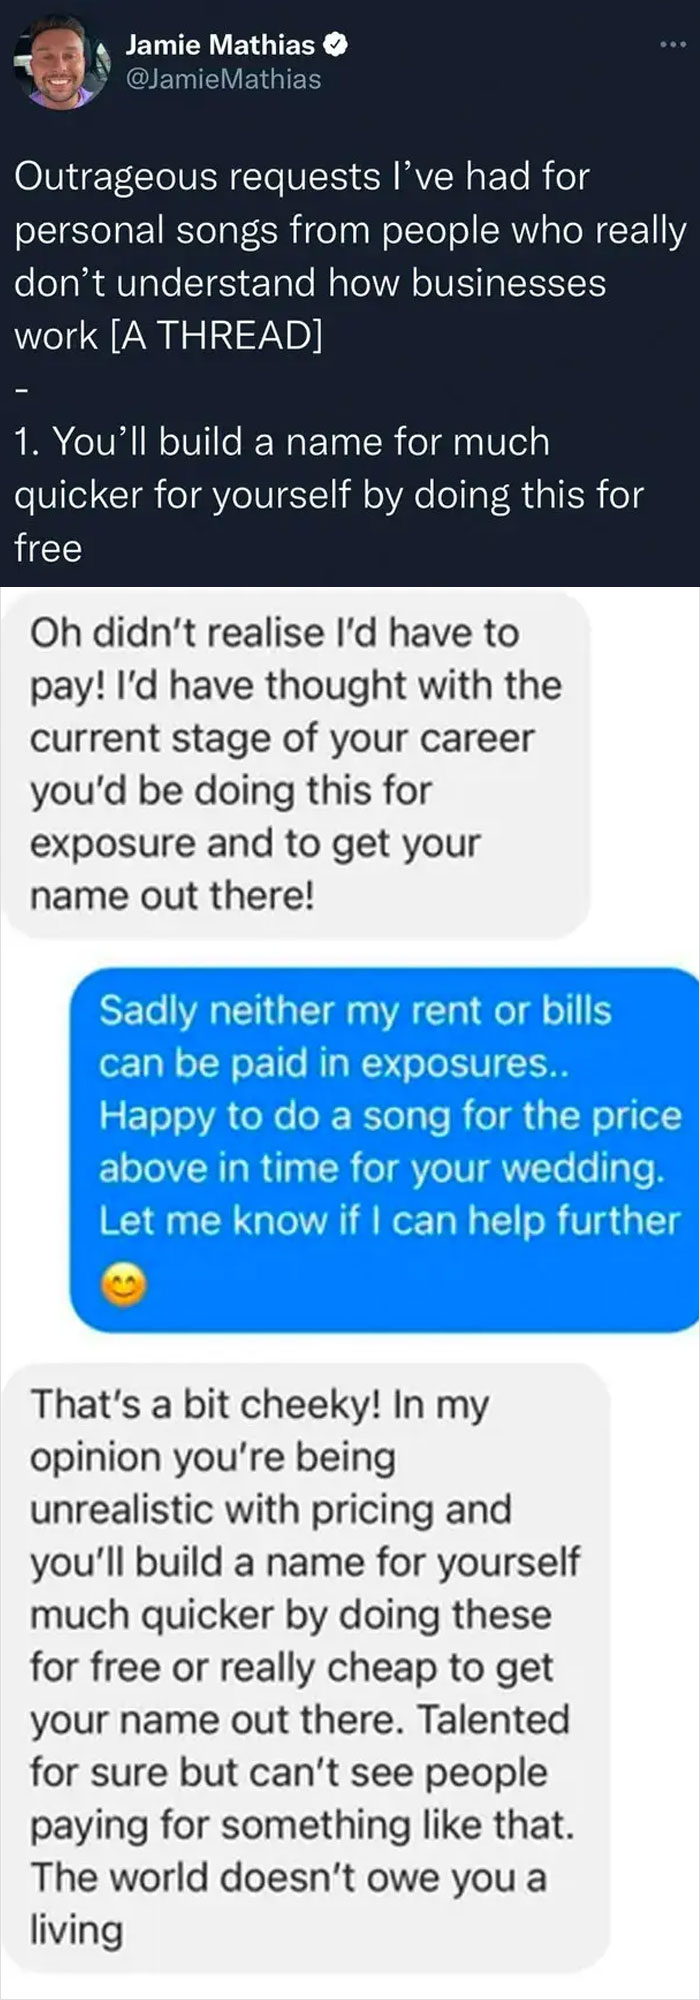 This Person Suggesting A Singer-Songwriter Make Them A Free Song For Their Wedding Because ~exposure